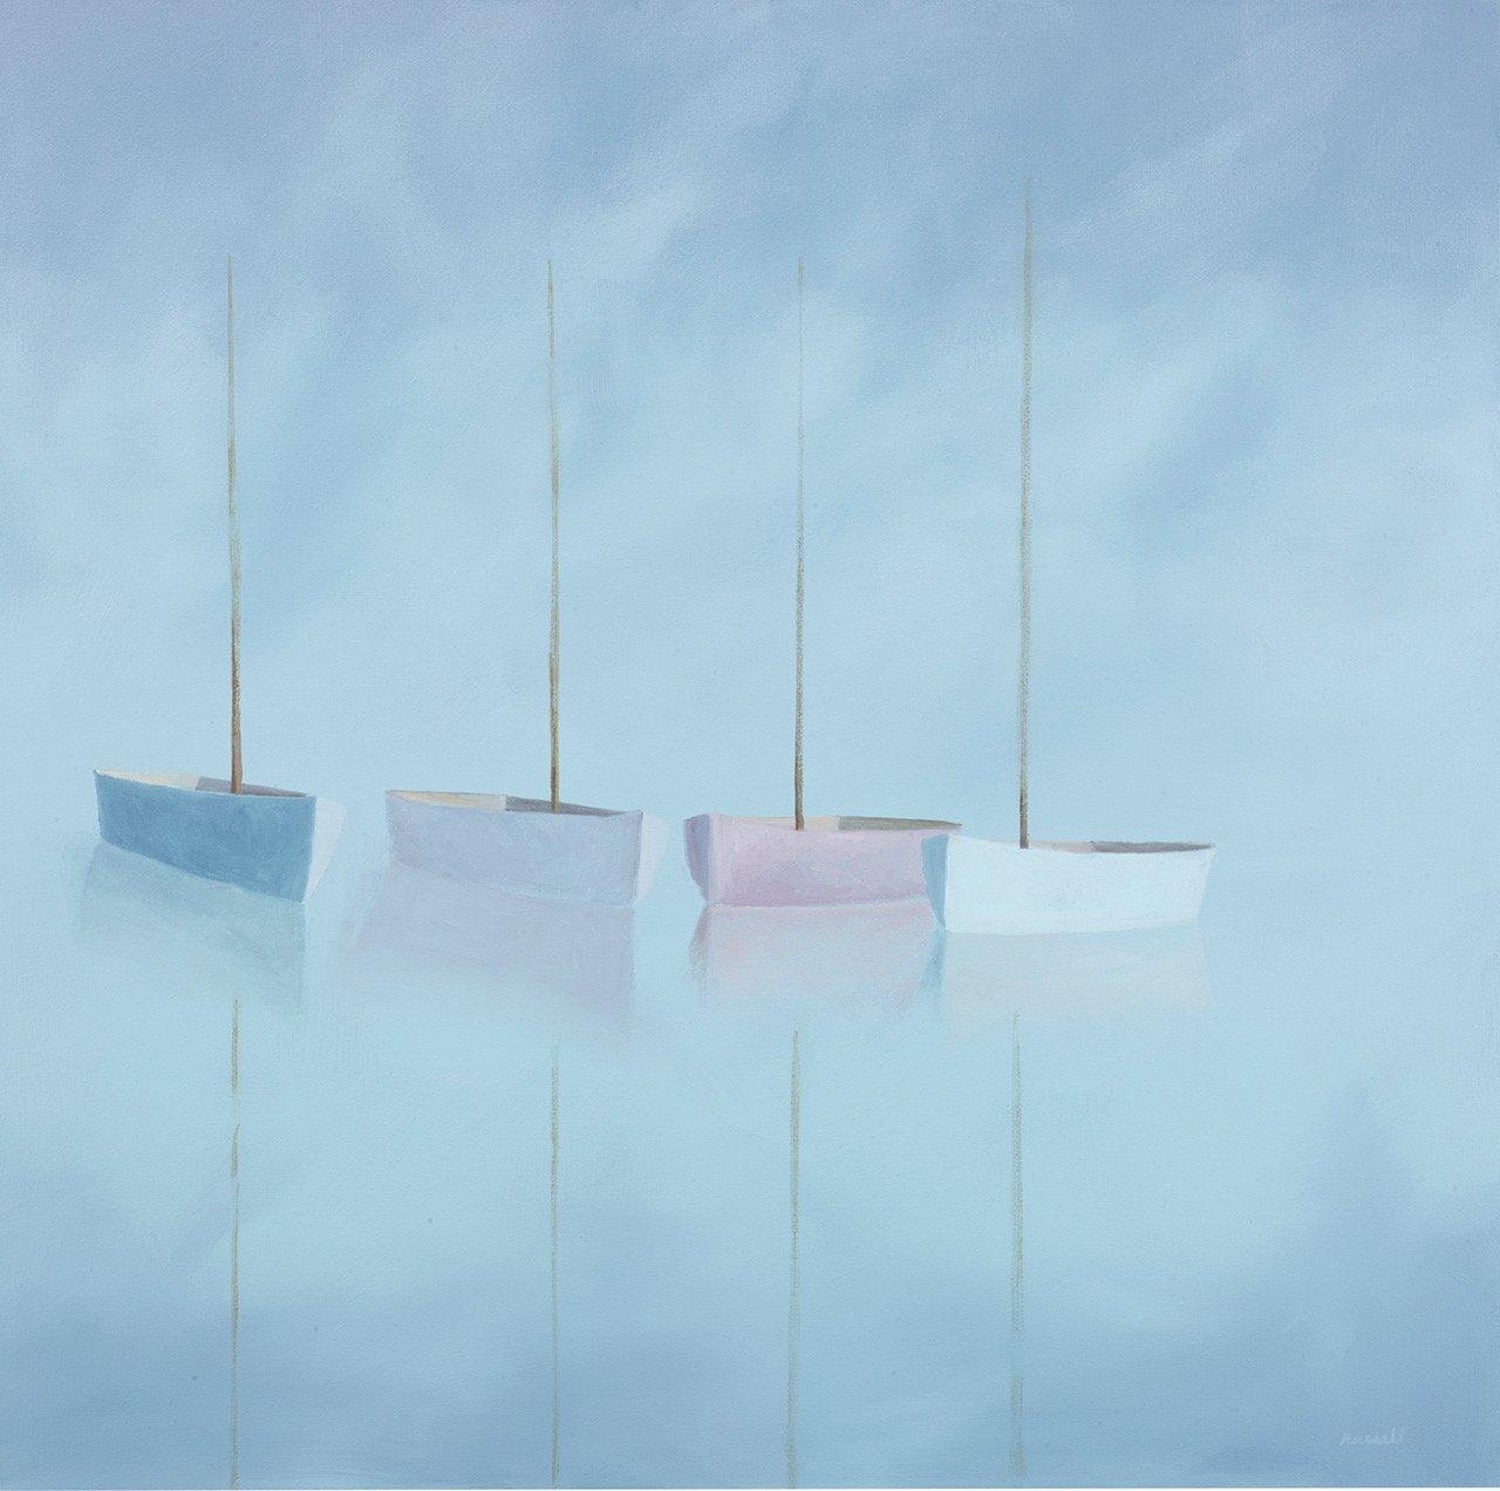 Matthew Jay Russell, "In a Row" 30x30 Dreamy Coastal Boat Oil Painting on  Canvas For Sale at 1stDibs